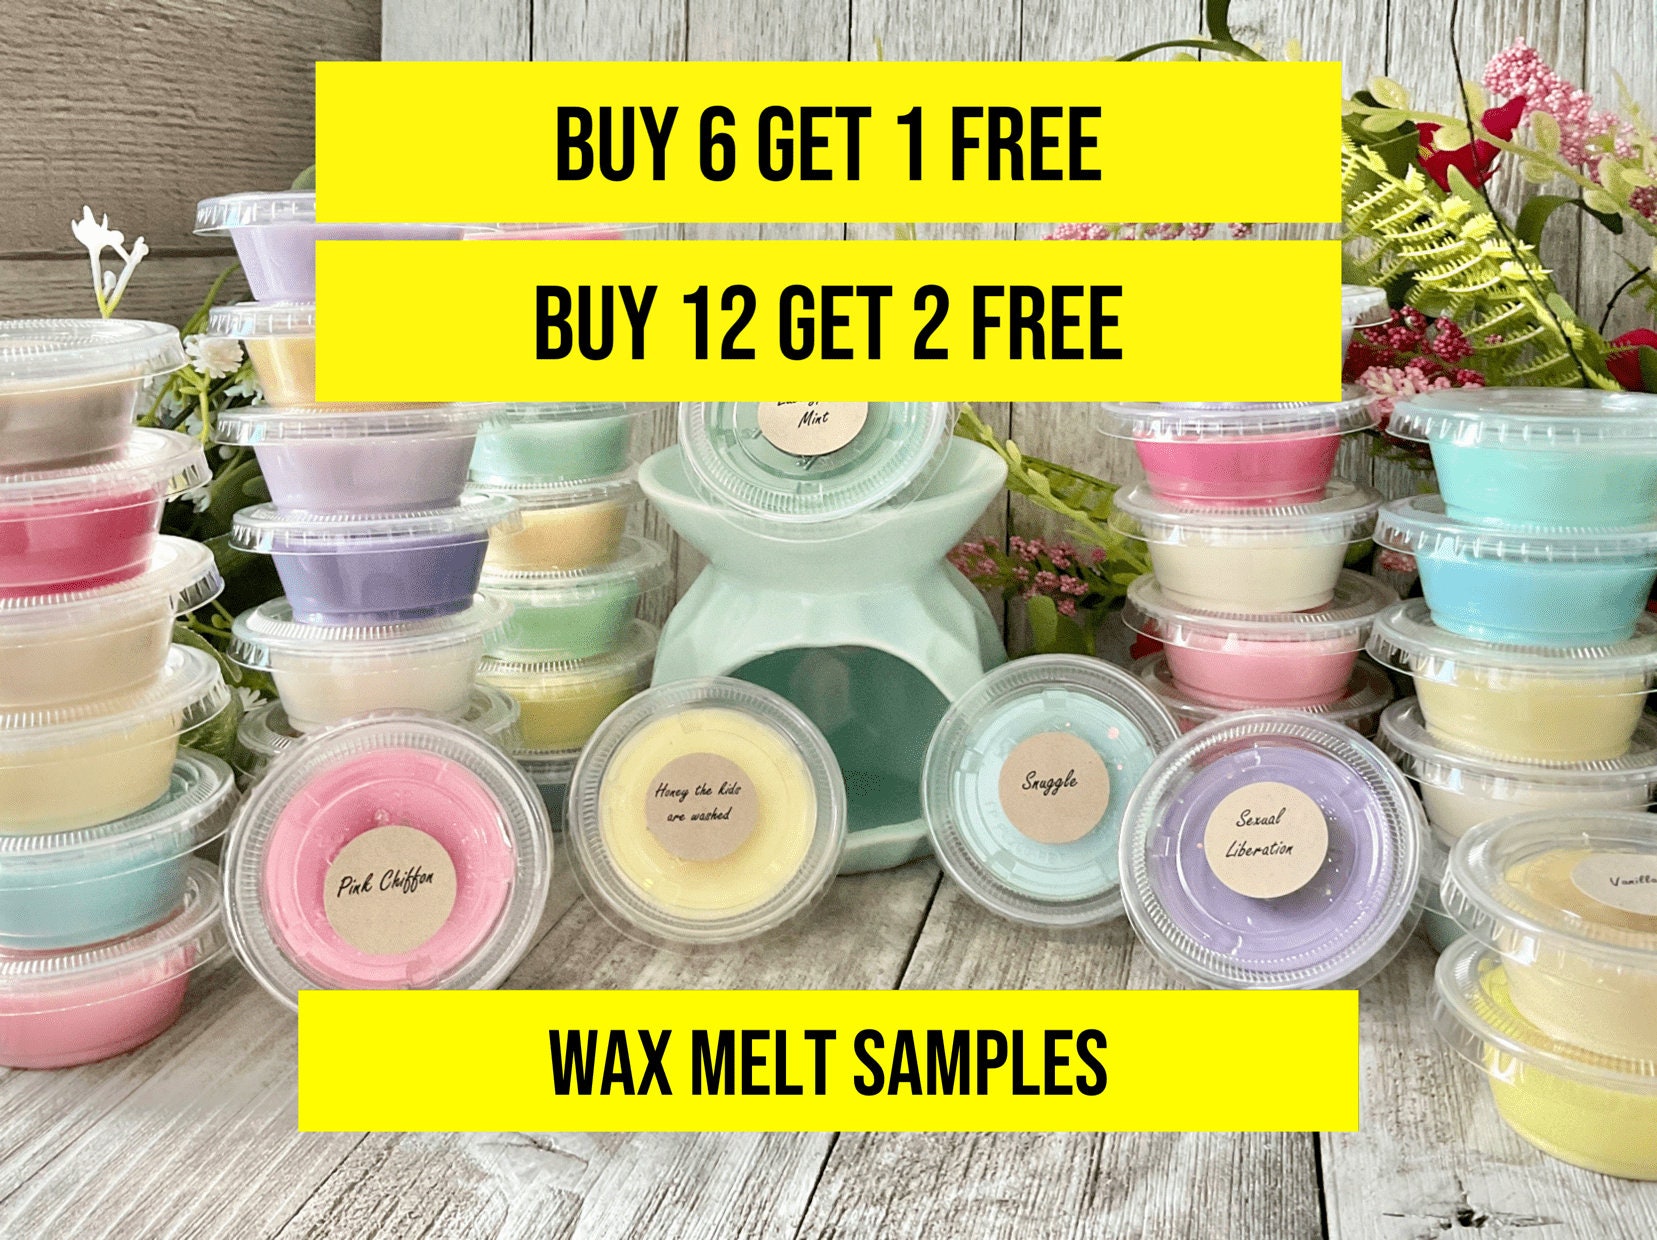 Wax Melt 6 Cube Pack - Candles - Deerly Blessed, Home Decor